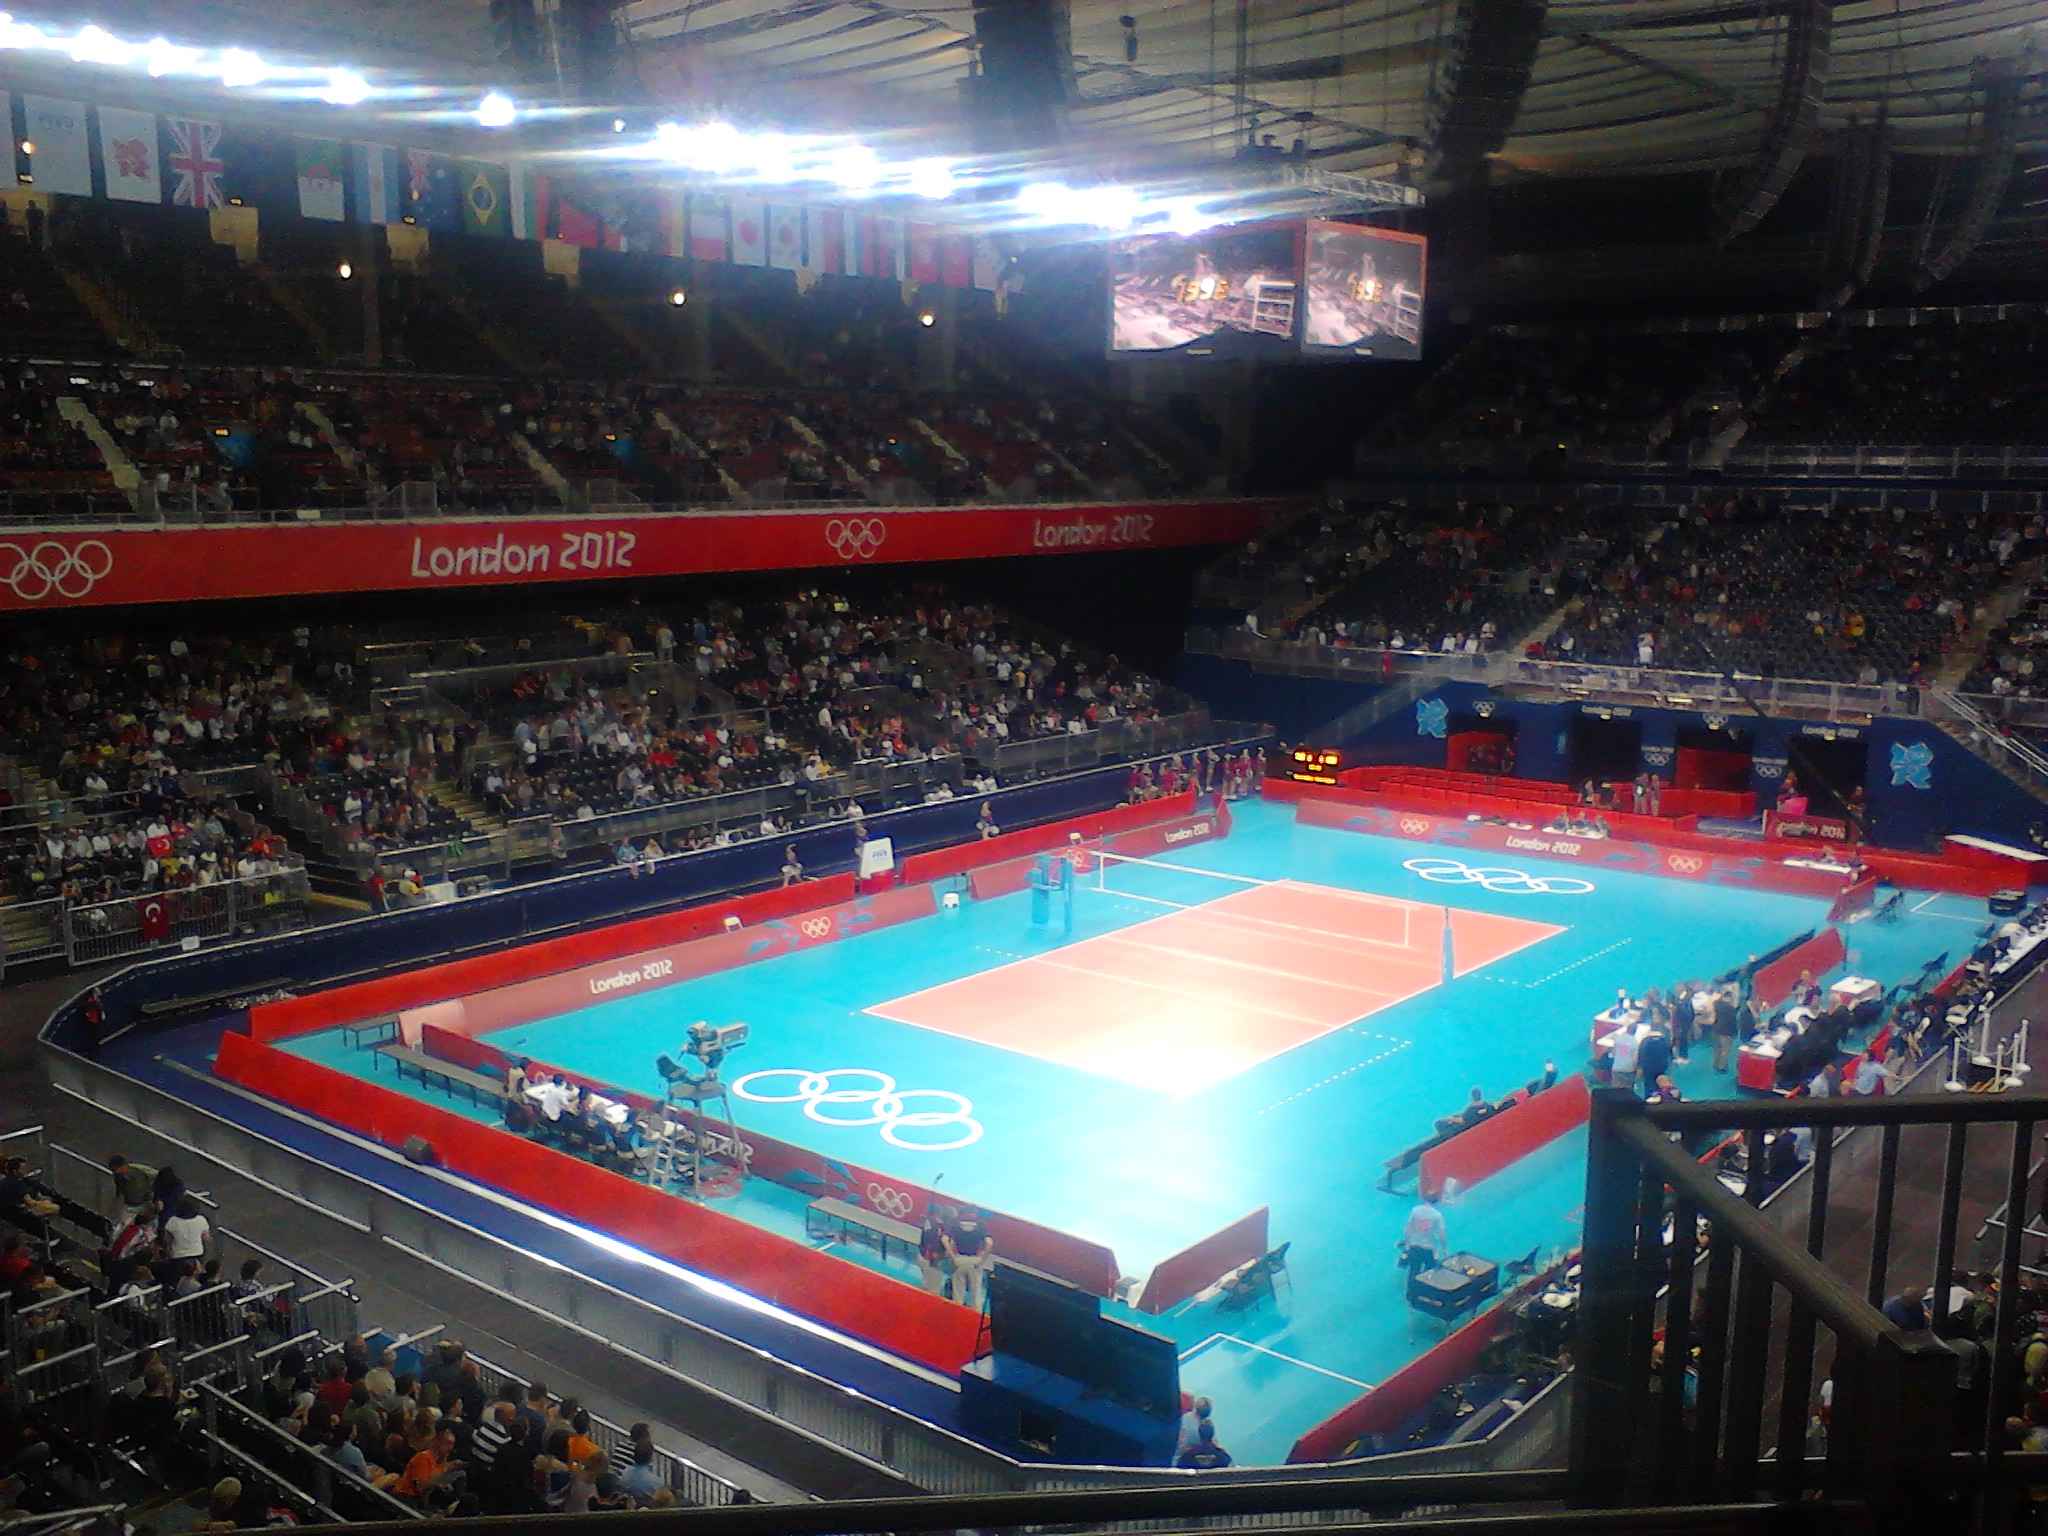 Olympic Volley Ball - Earls Court London 3 Aug 2012